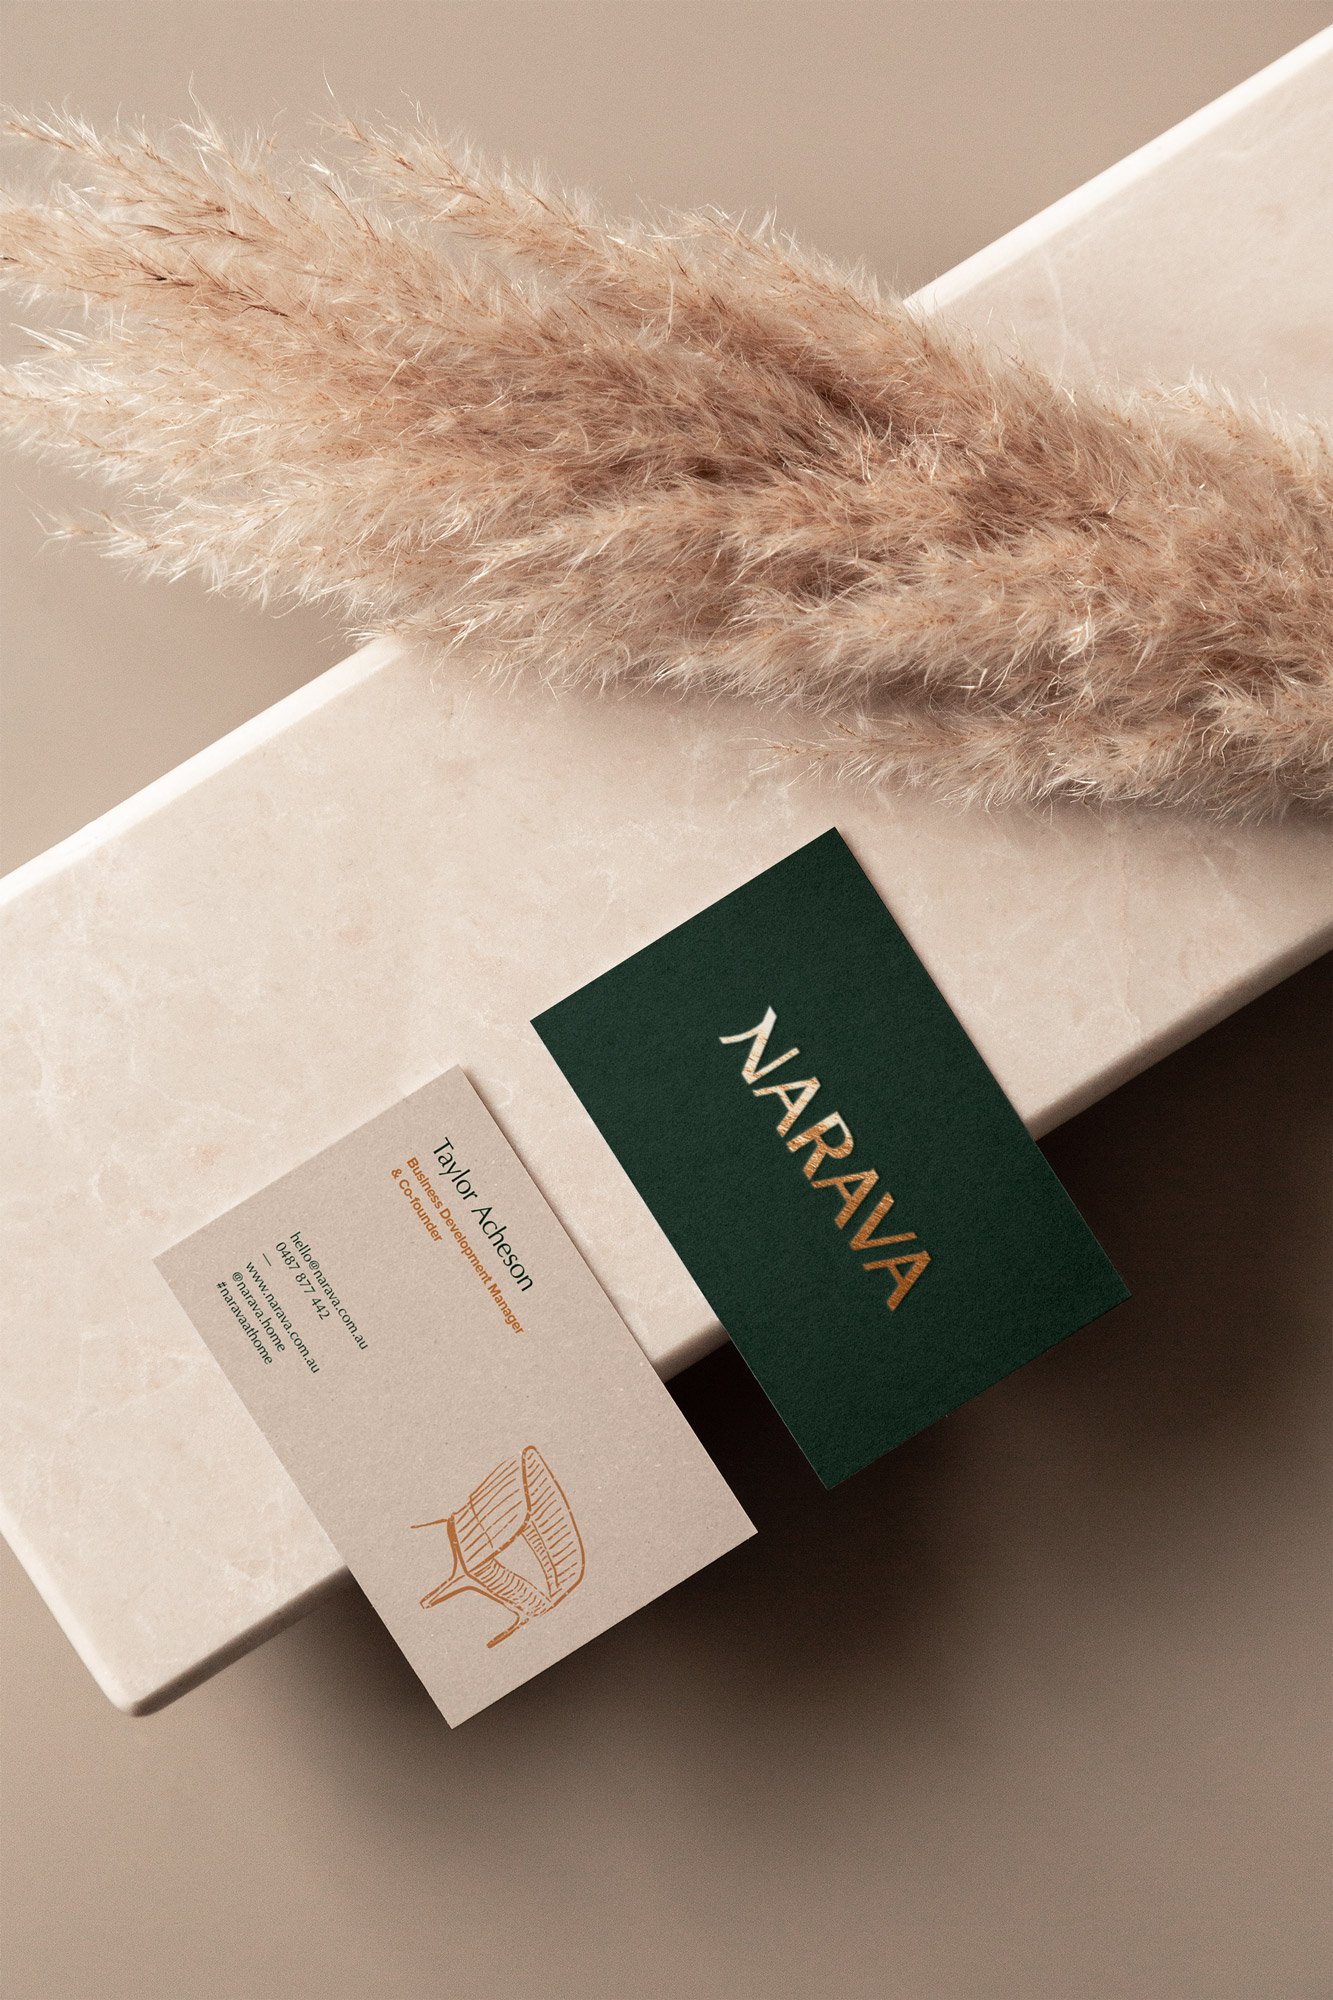 Narava brand applied to business cards